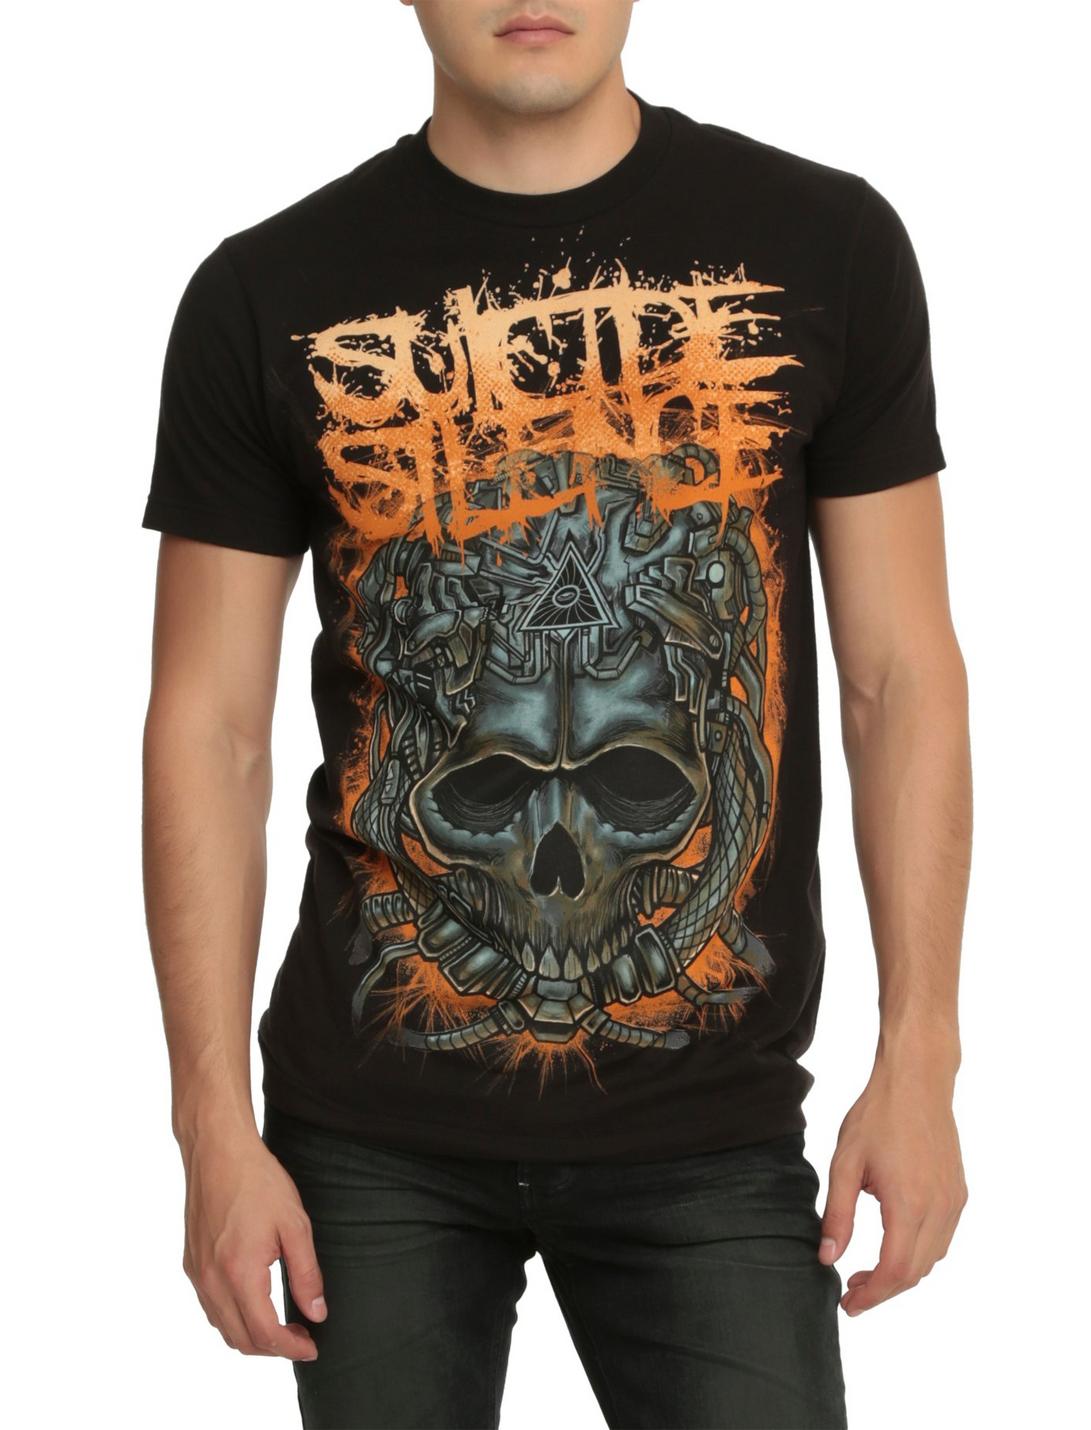 Suicide Silence Robot Skull T-Shirt | Hot Topic